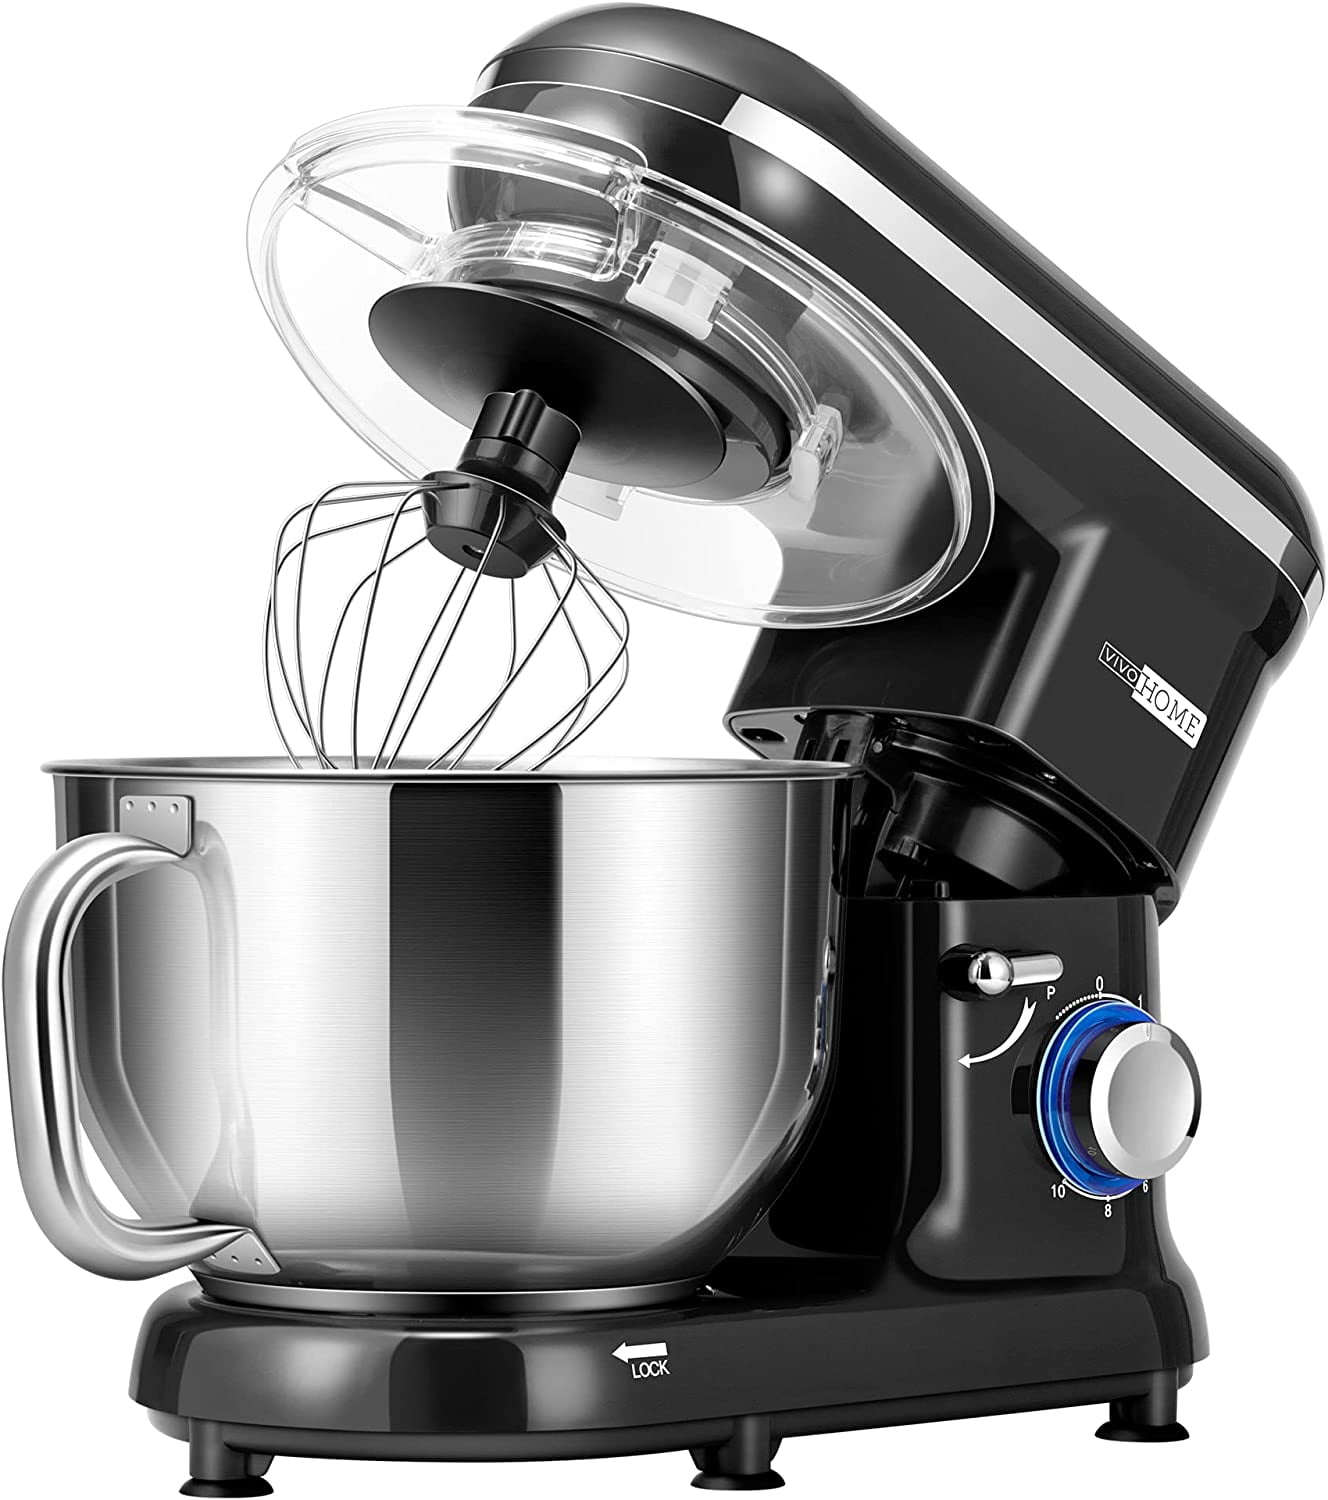 Biolomix Kitchen Electric Stand Mixer, 6-Speed Tilt-Head Food Mixer with  6.5-QT Stainless Steel Bowl, Dough Hook, Flat Beater, Whisk and Anti-Splash